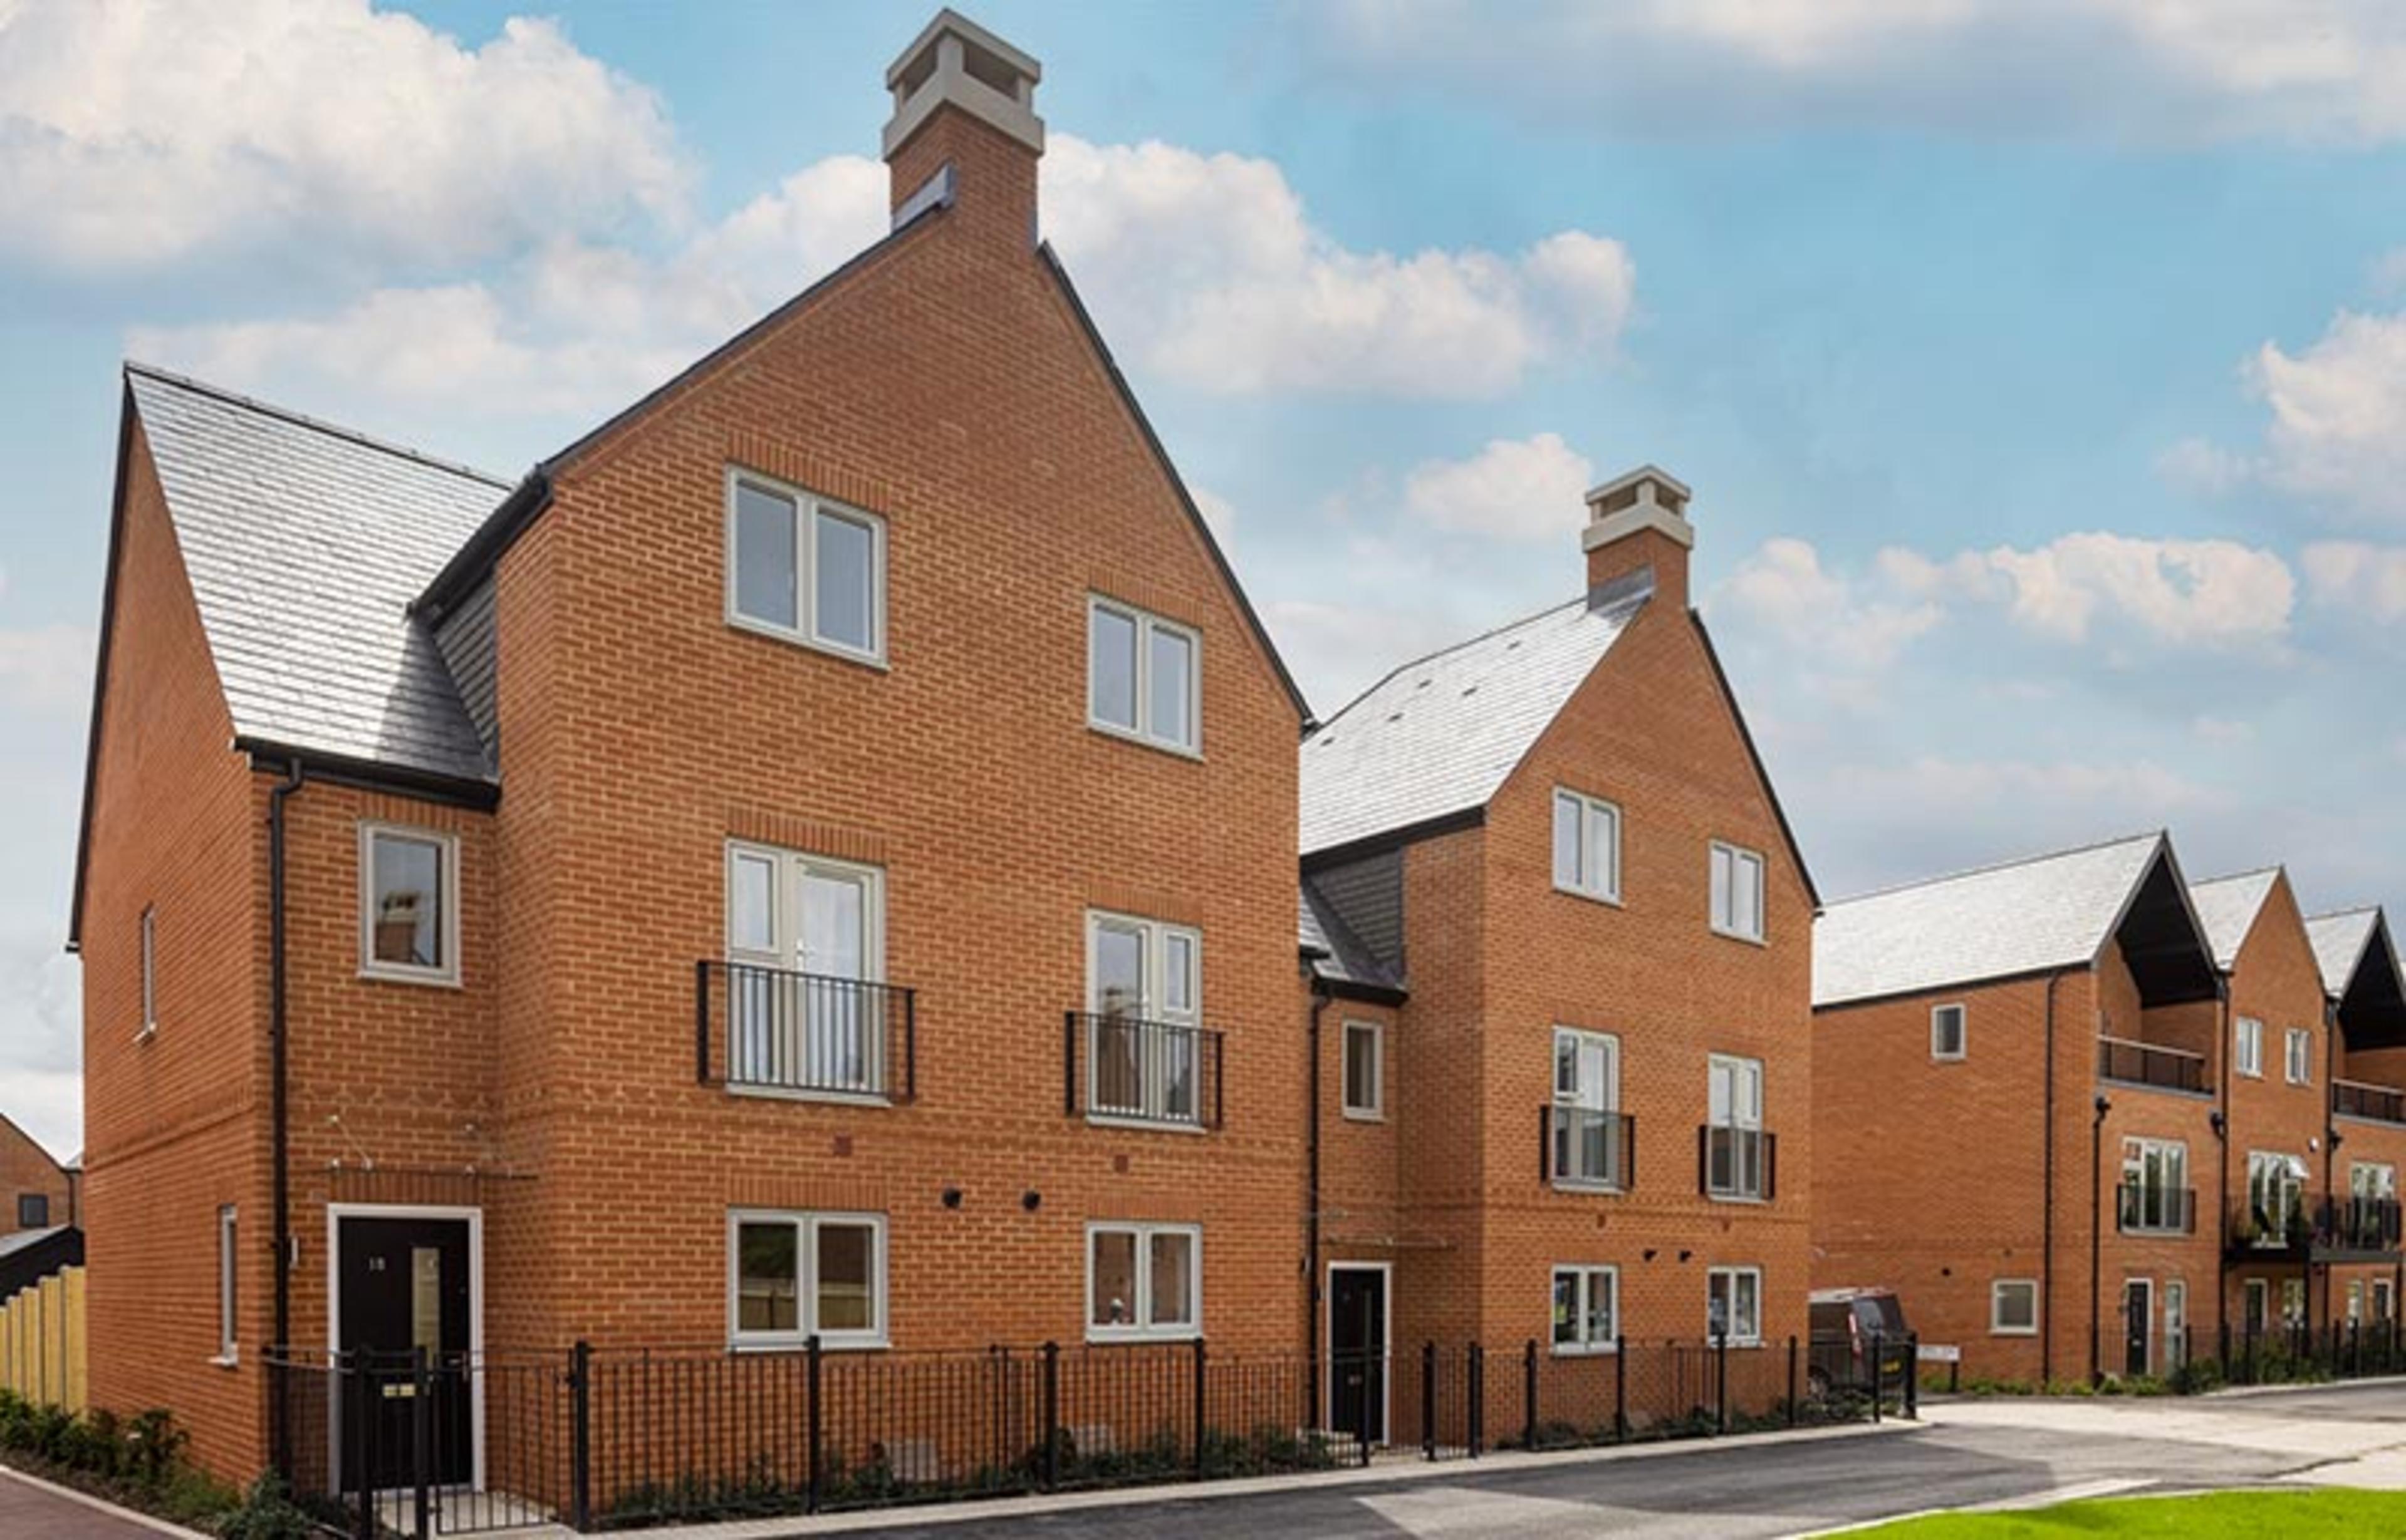 The front of a three bedroom town house at Kings Barton, Winchester